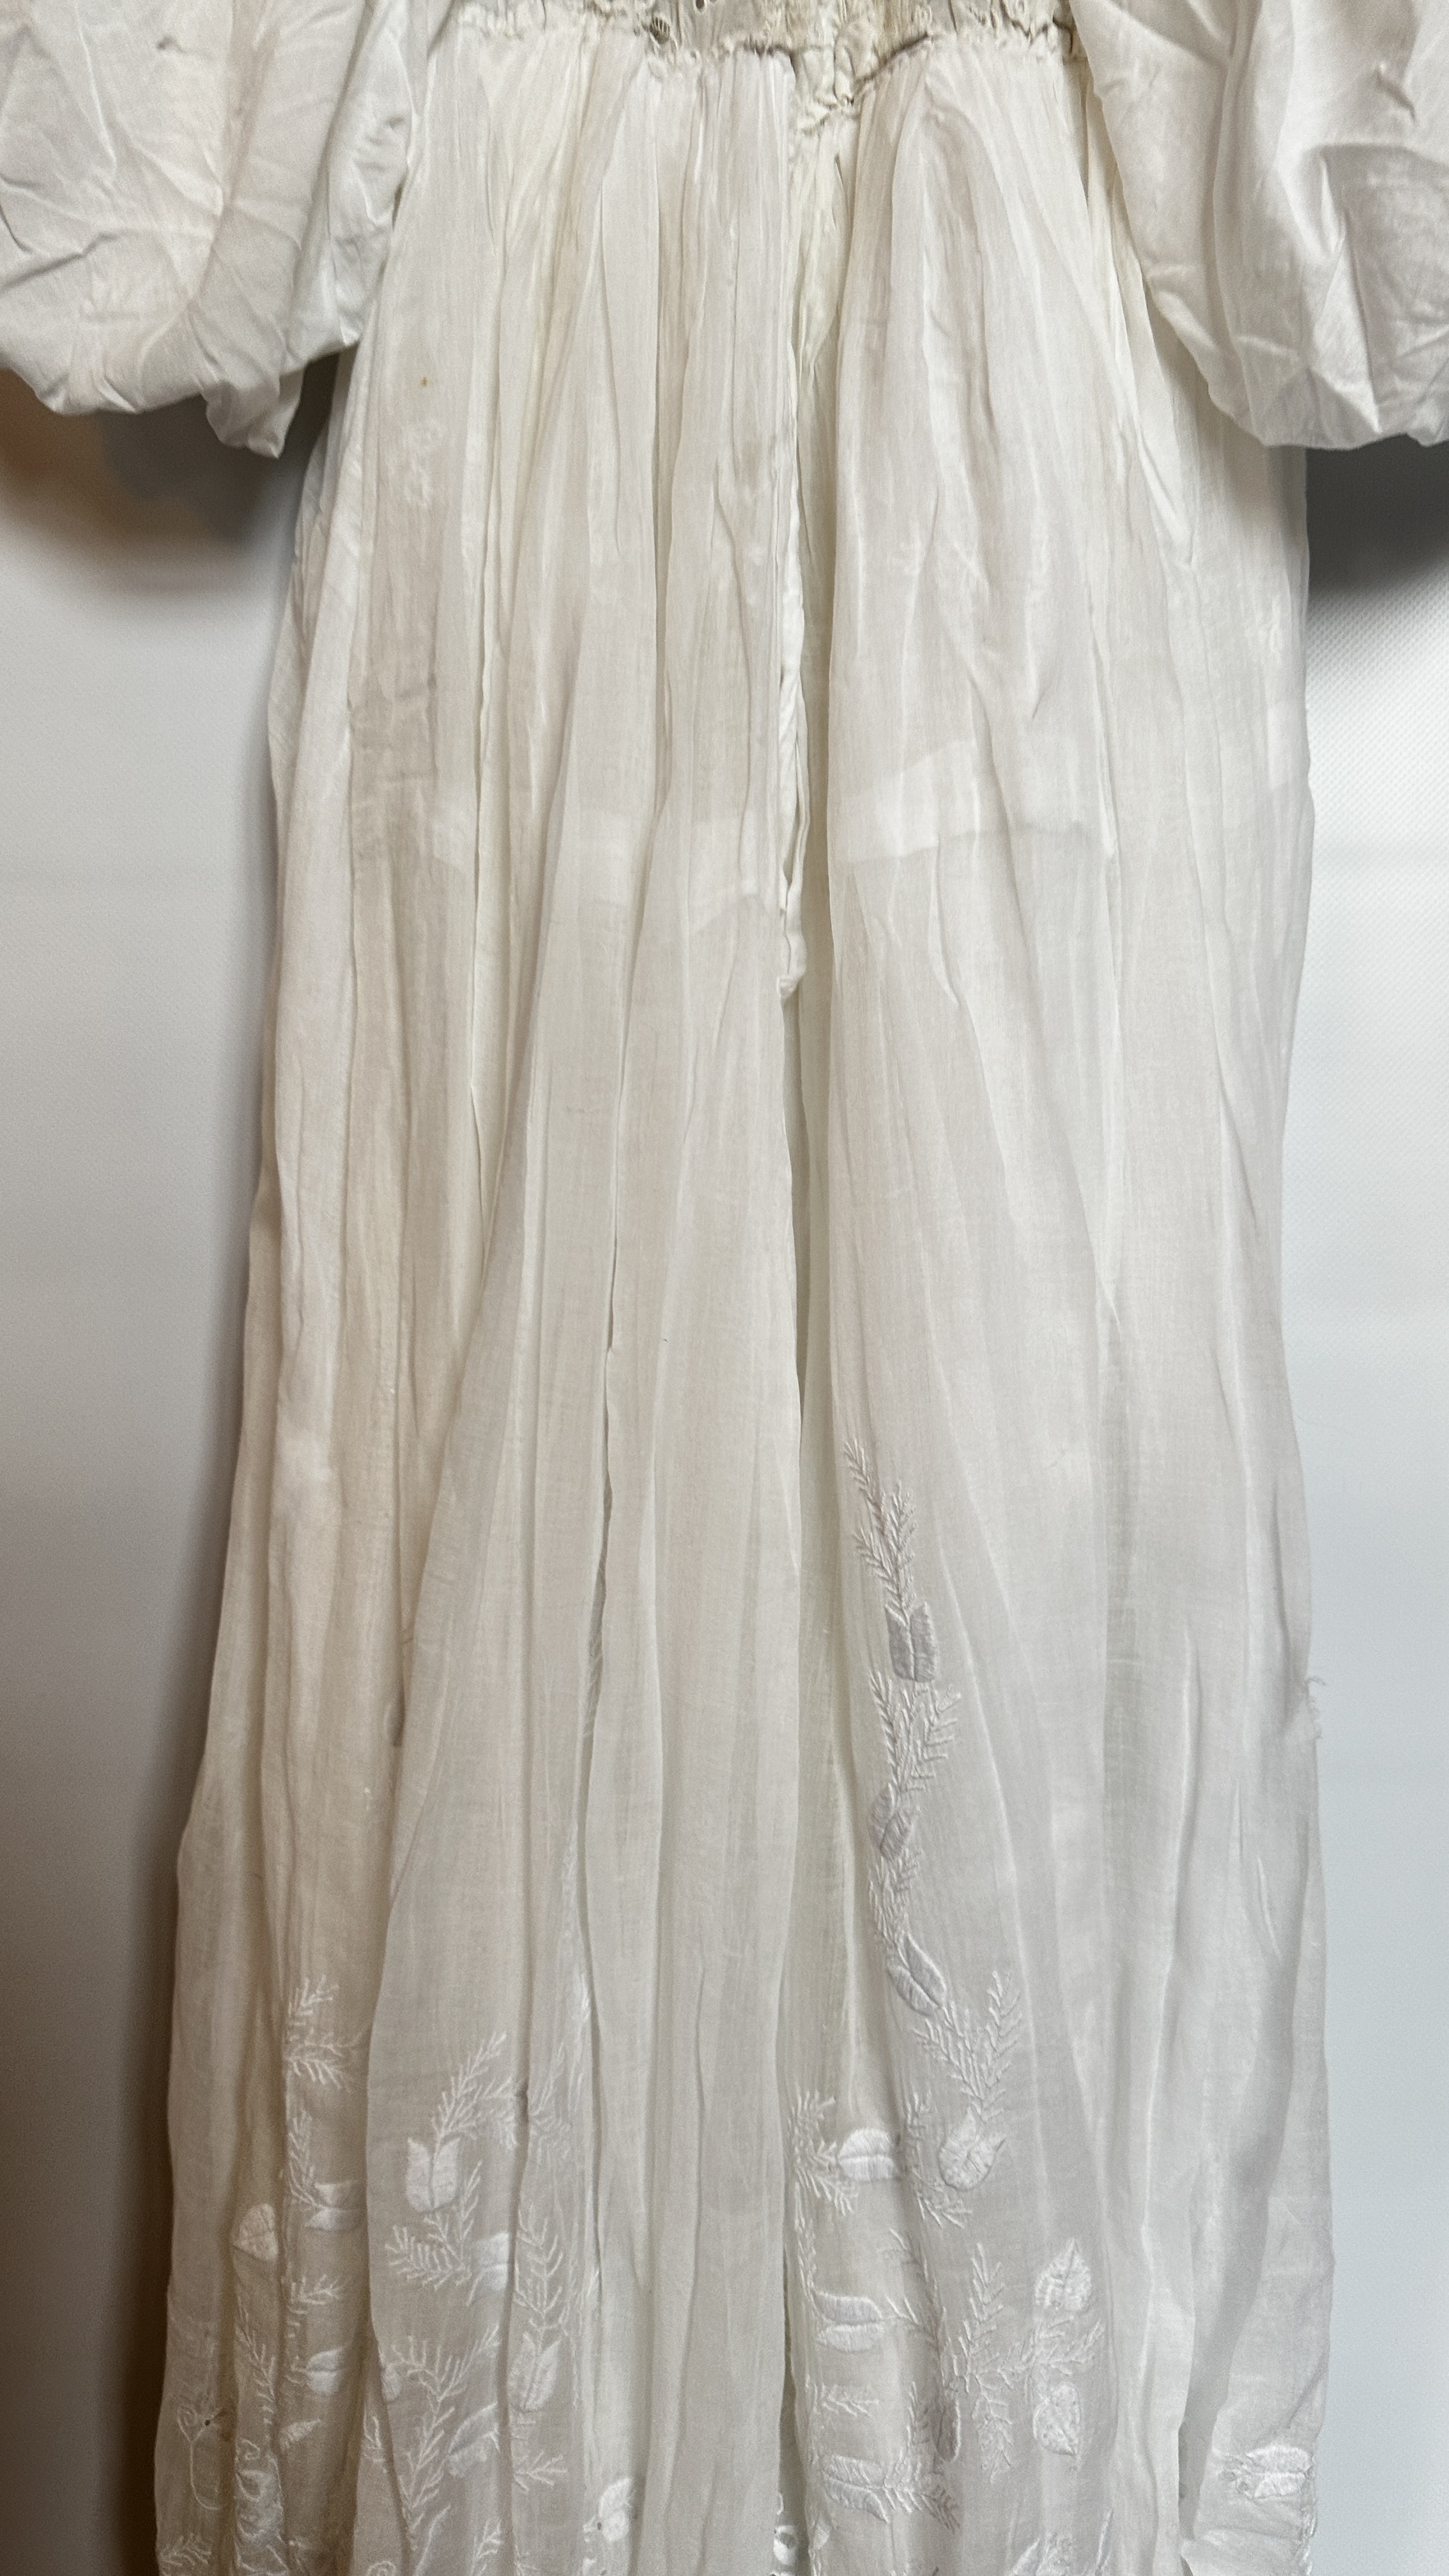 FINE WHITE COTTON EDWARDIAN DRESS, ALL OVER EMBROIDERY, EMPIRE LINE, PUFFED SLEEVES - A/F CONDITION, - Image 16 of 20